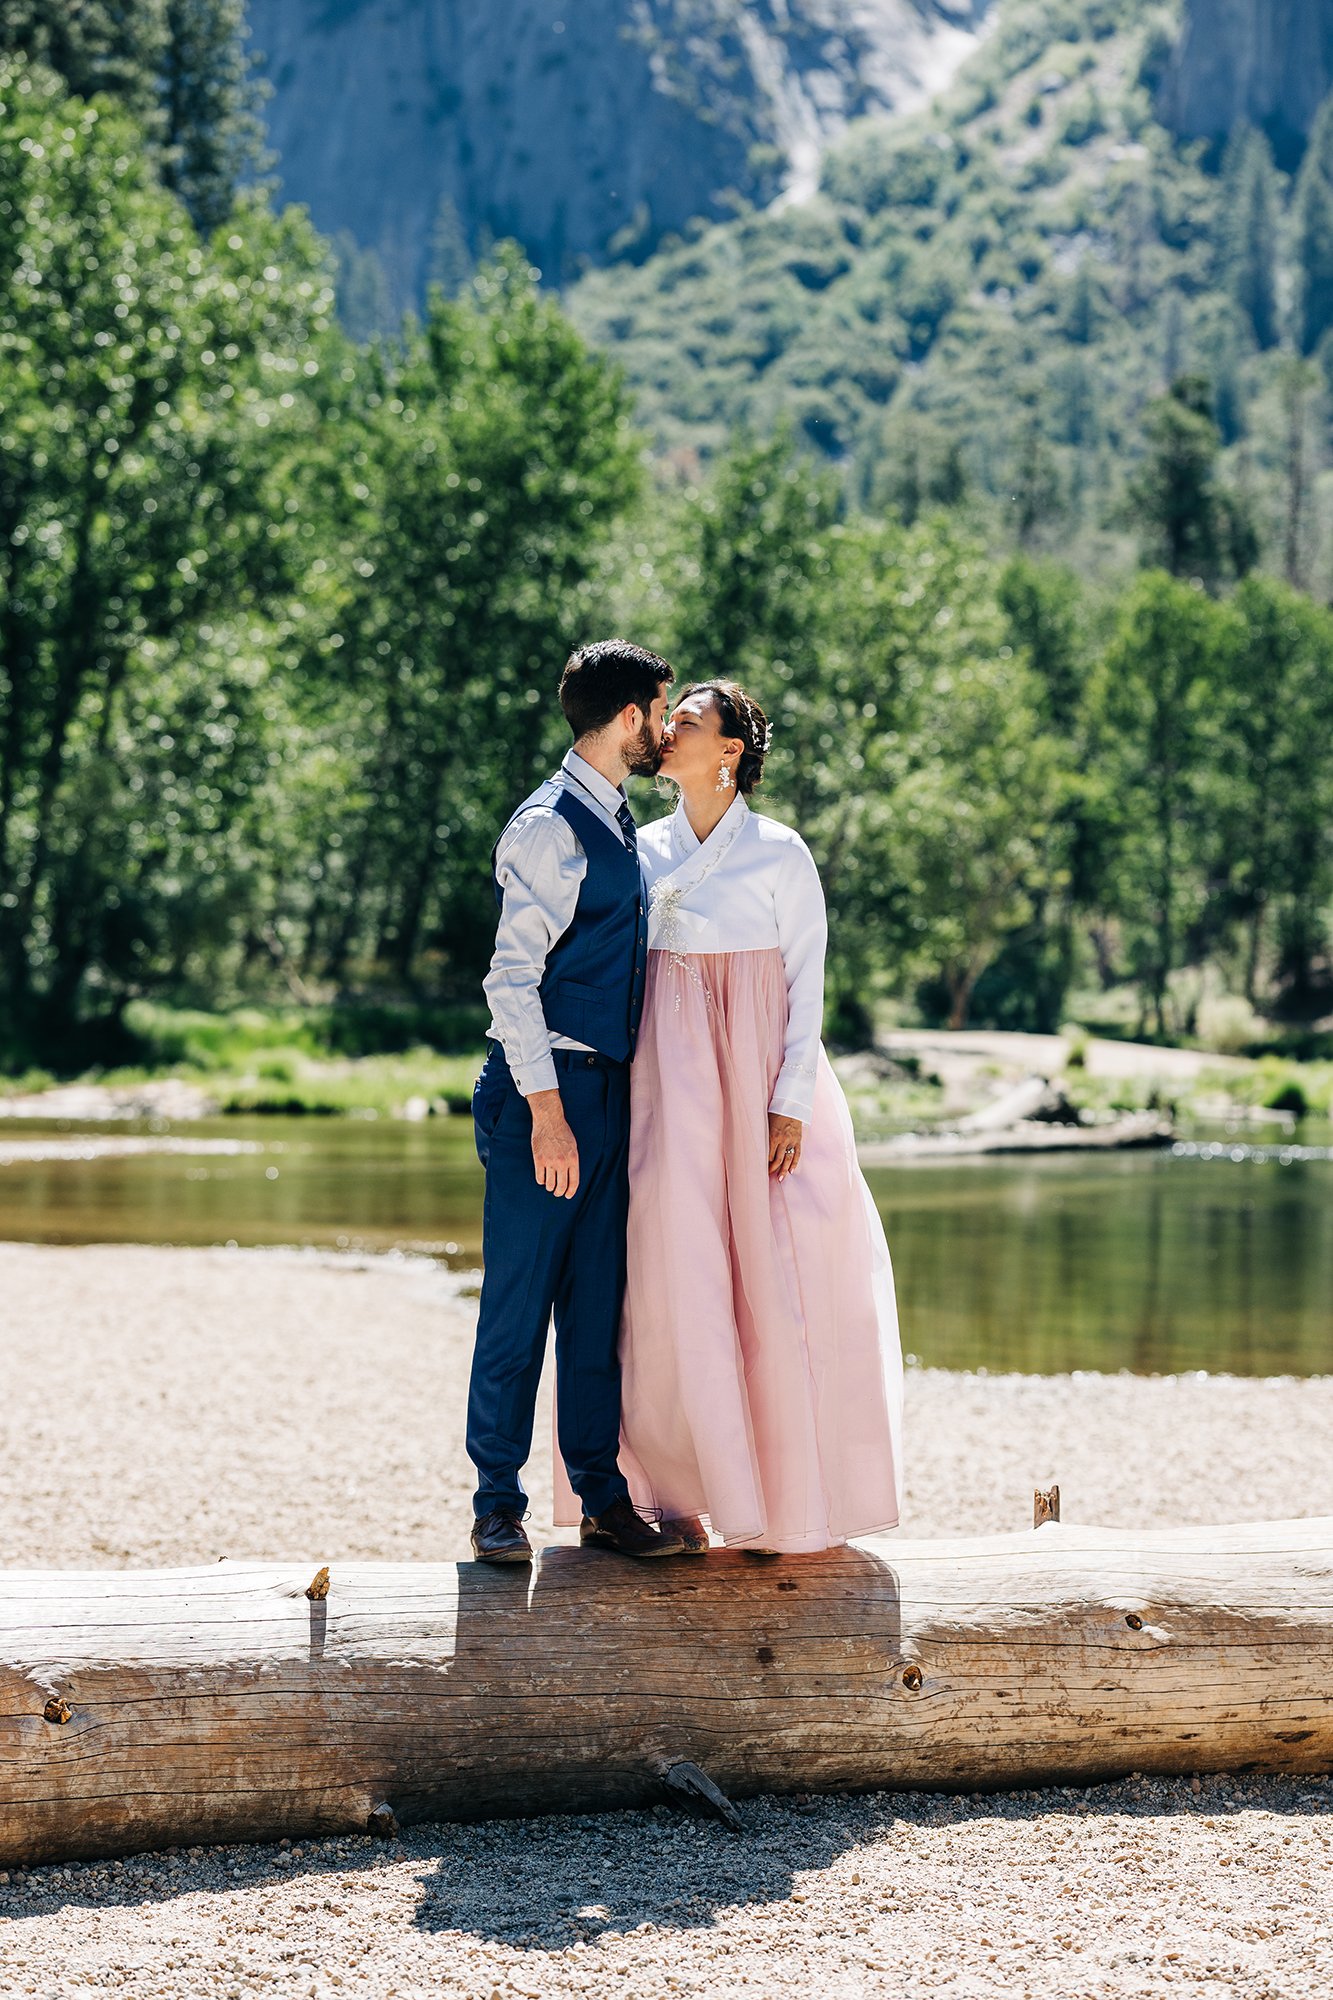 Yooree and Jarrod kiss on a log during their elopement in Yosemite National Park, California.